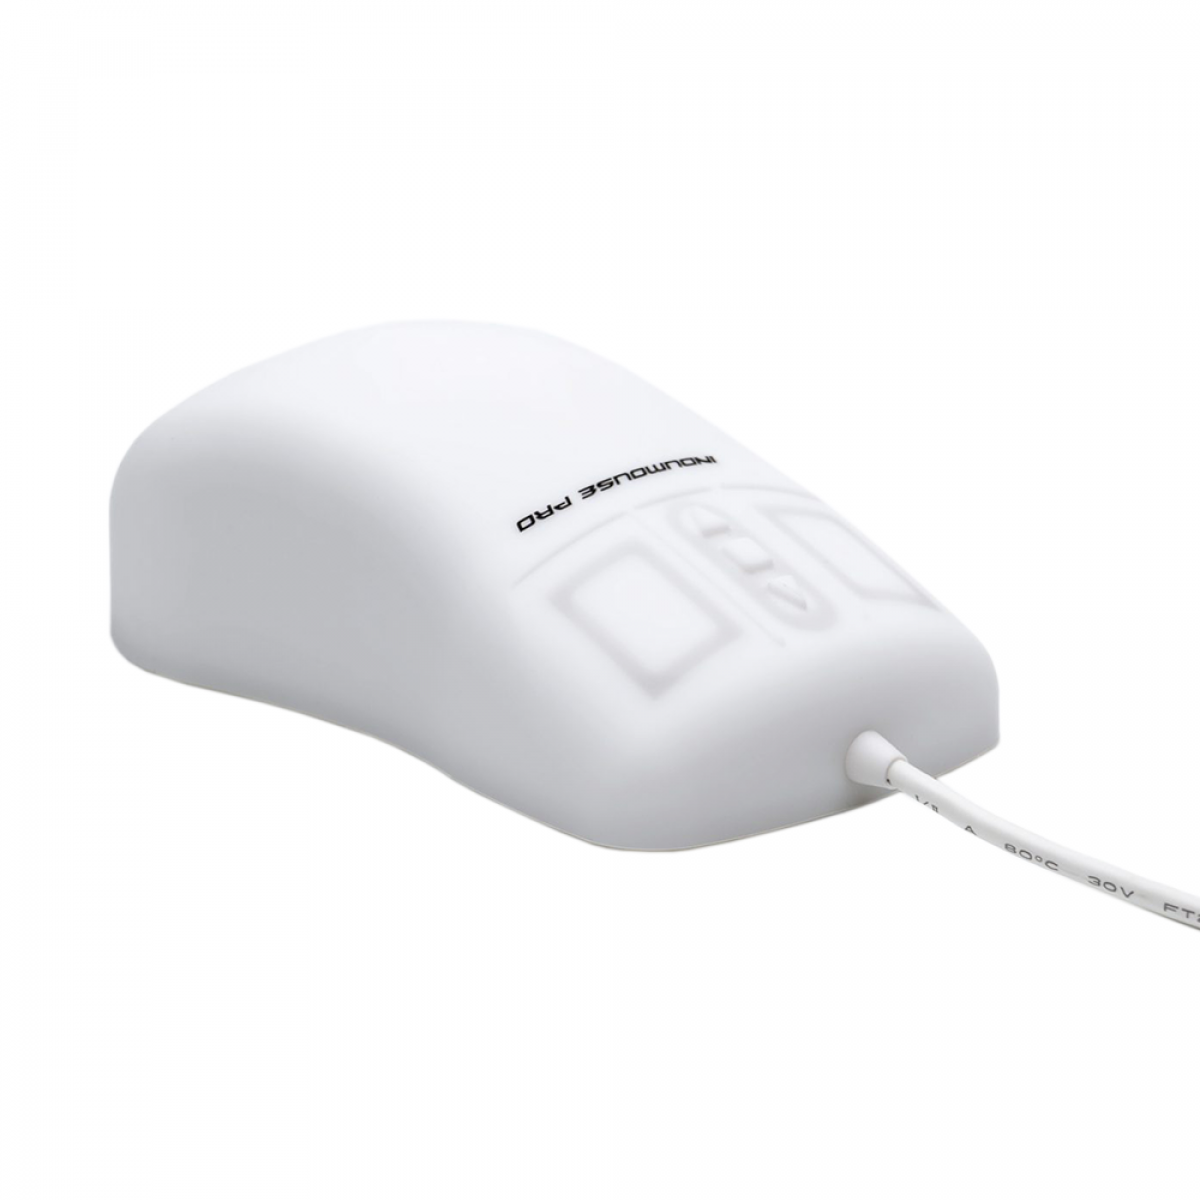 GETT Indumouse Pro washable mouse for healthcare